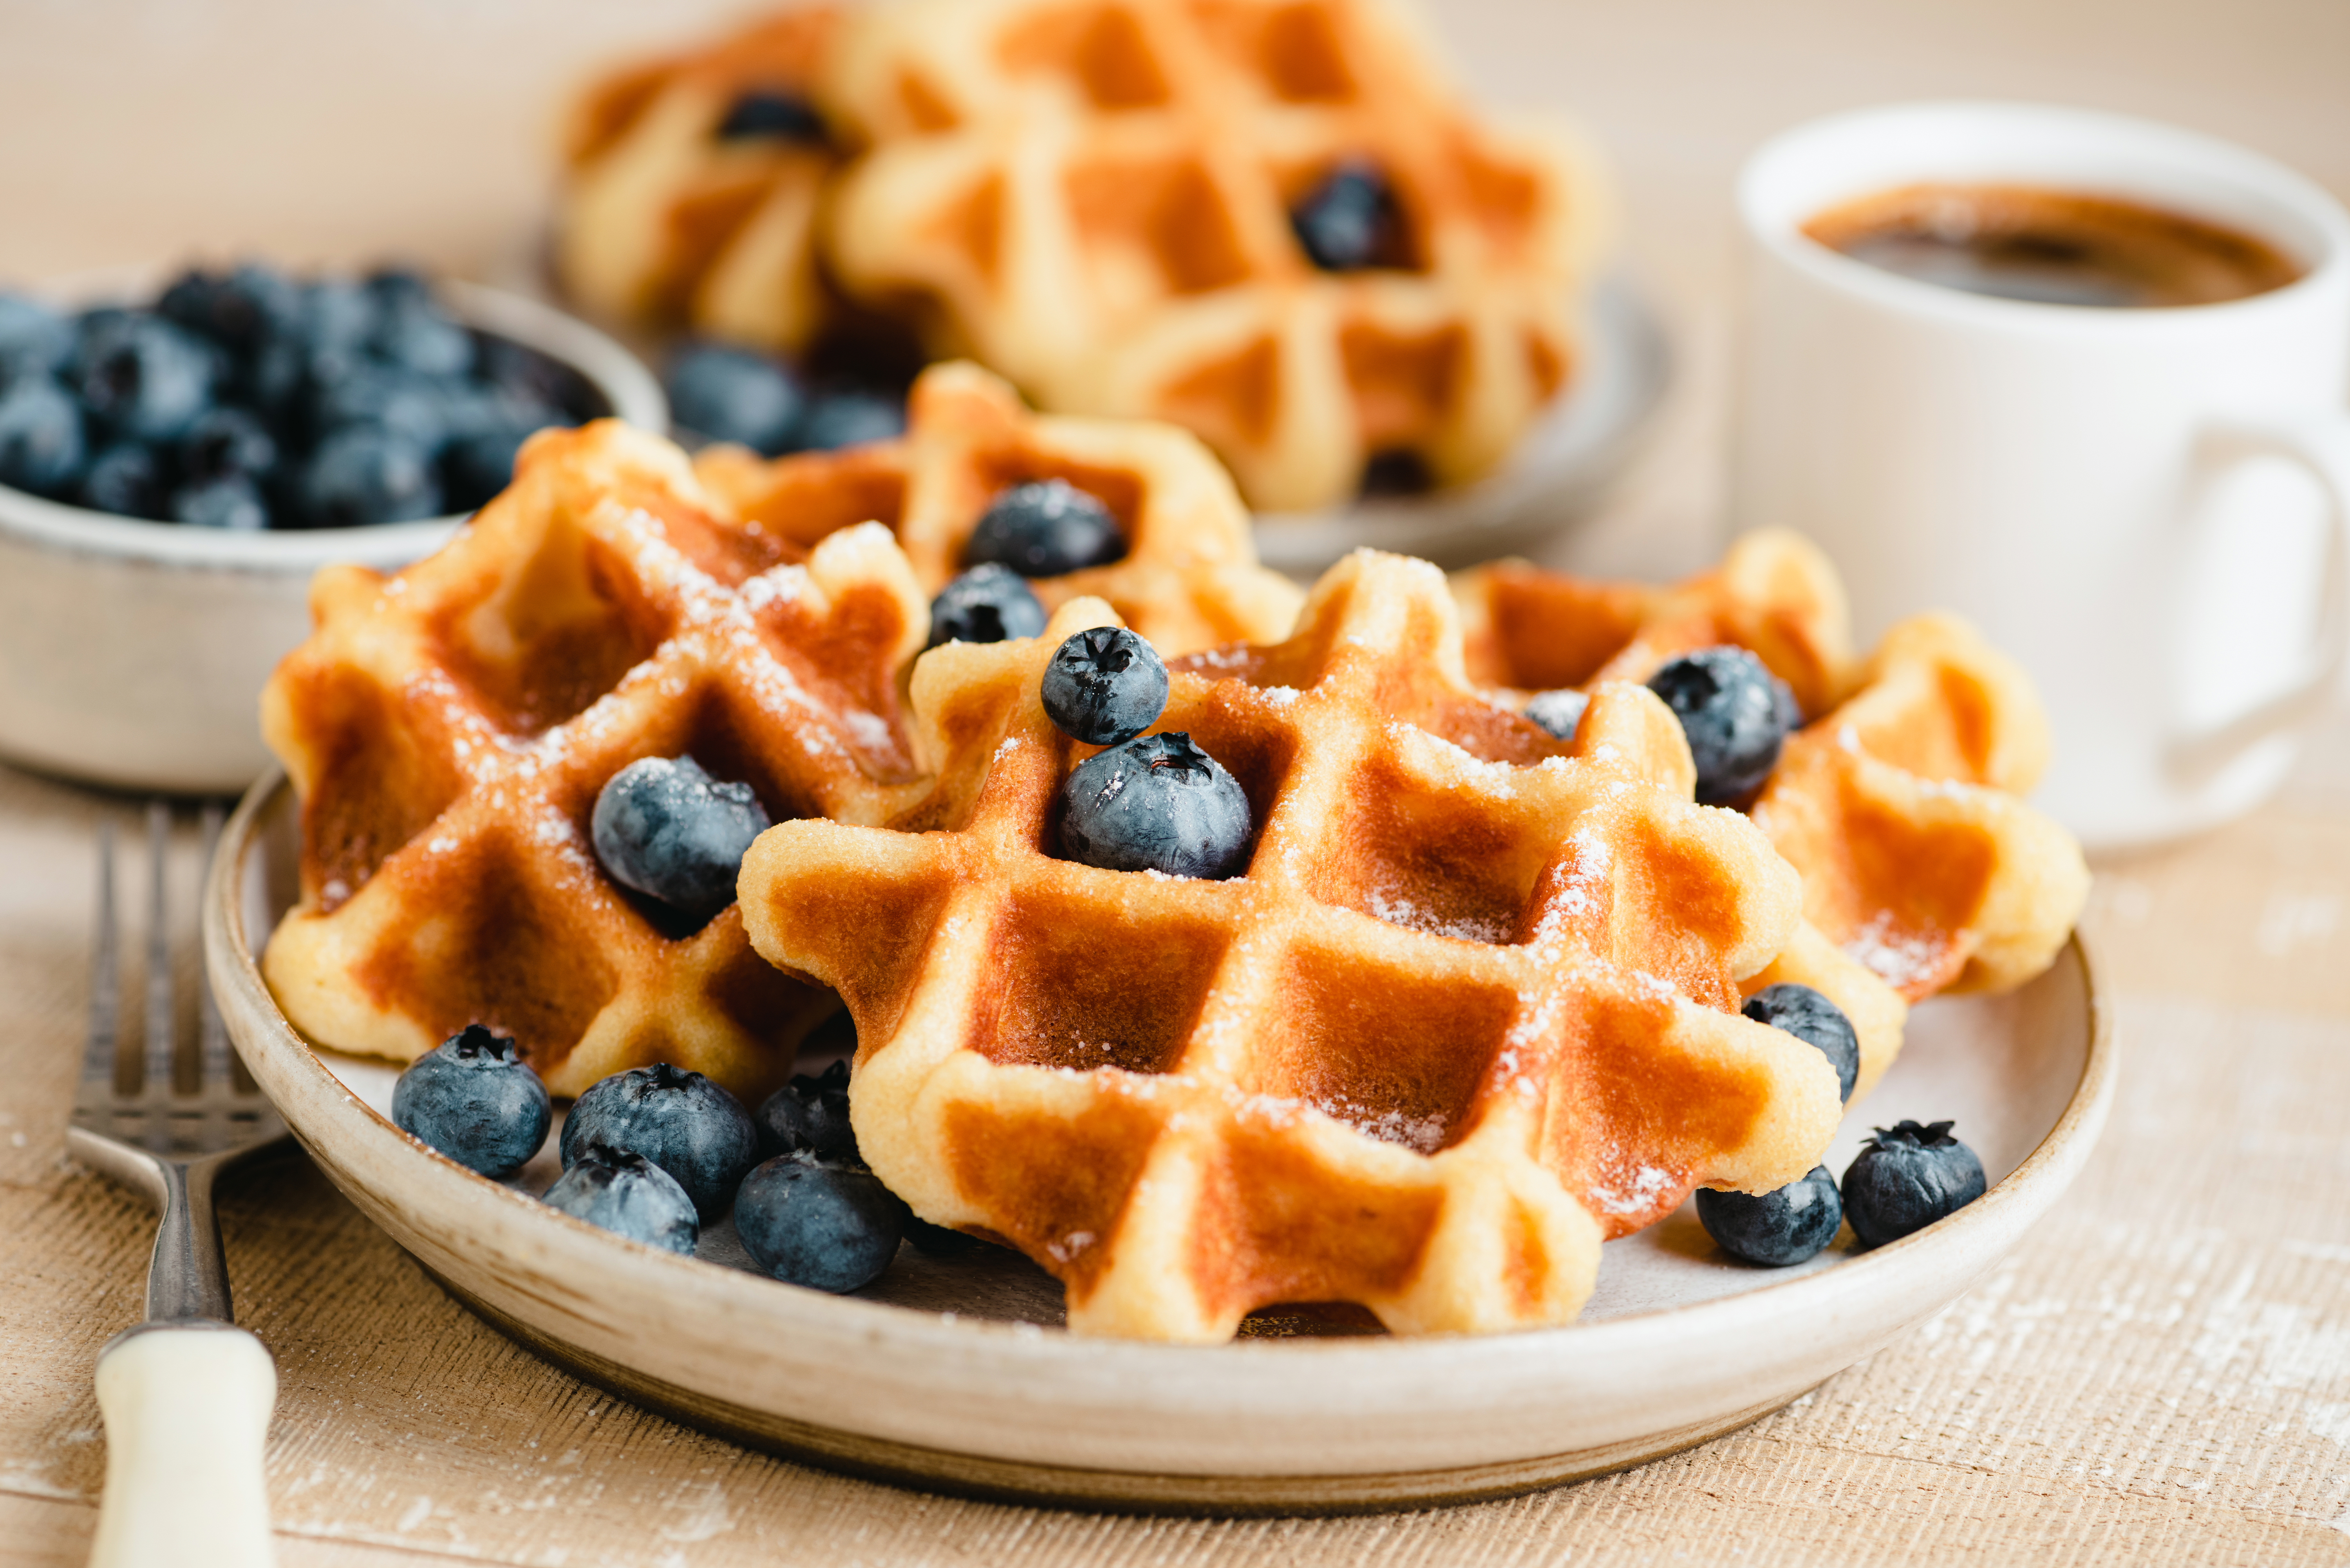 How Many Calories in a Waffle With Syrup? 